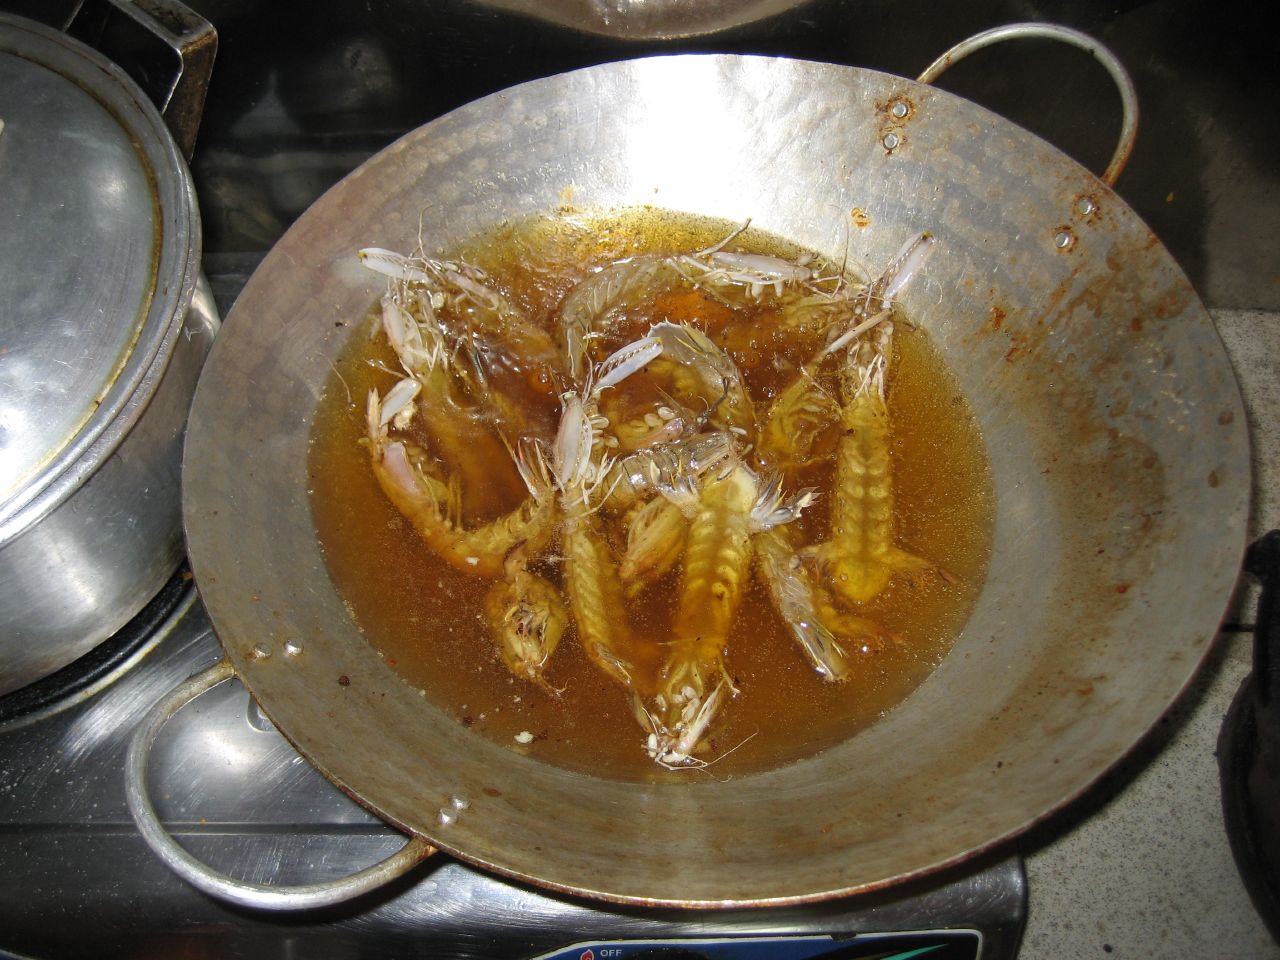 this is a bowl of cooked fish in sauce on a stove